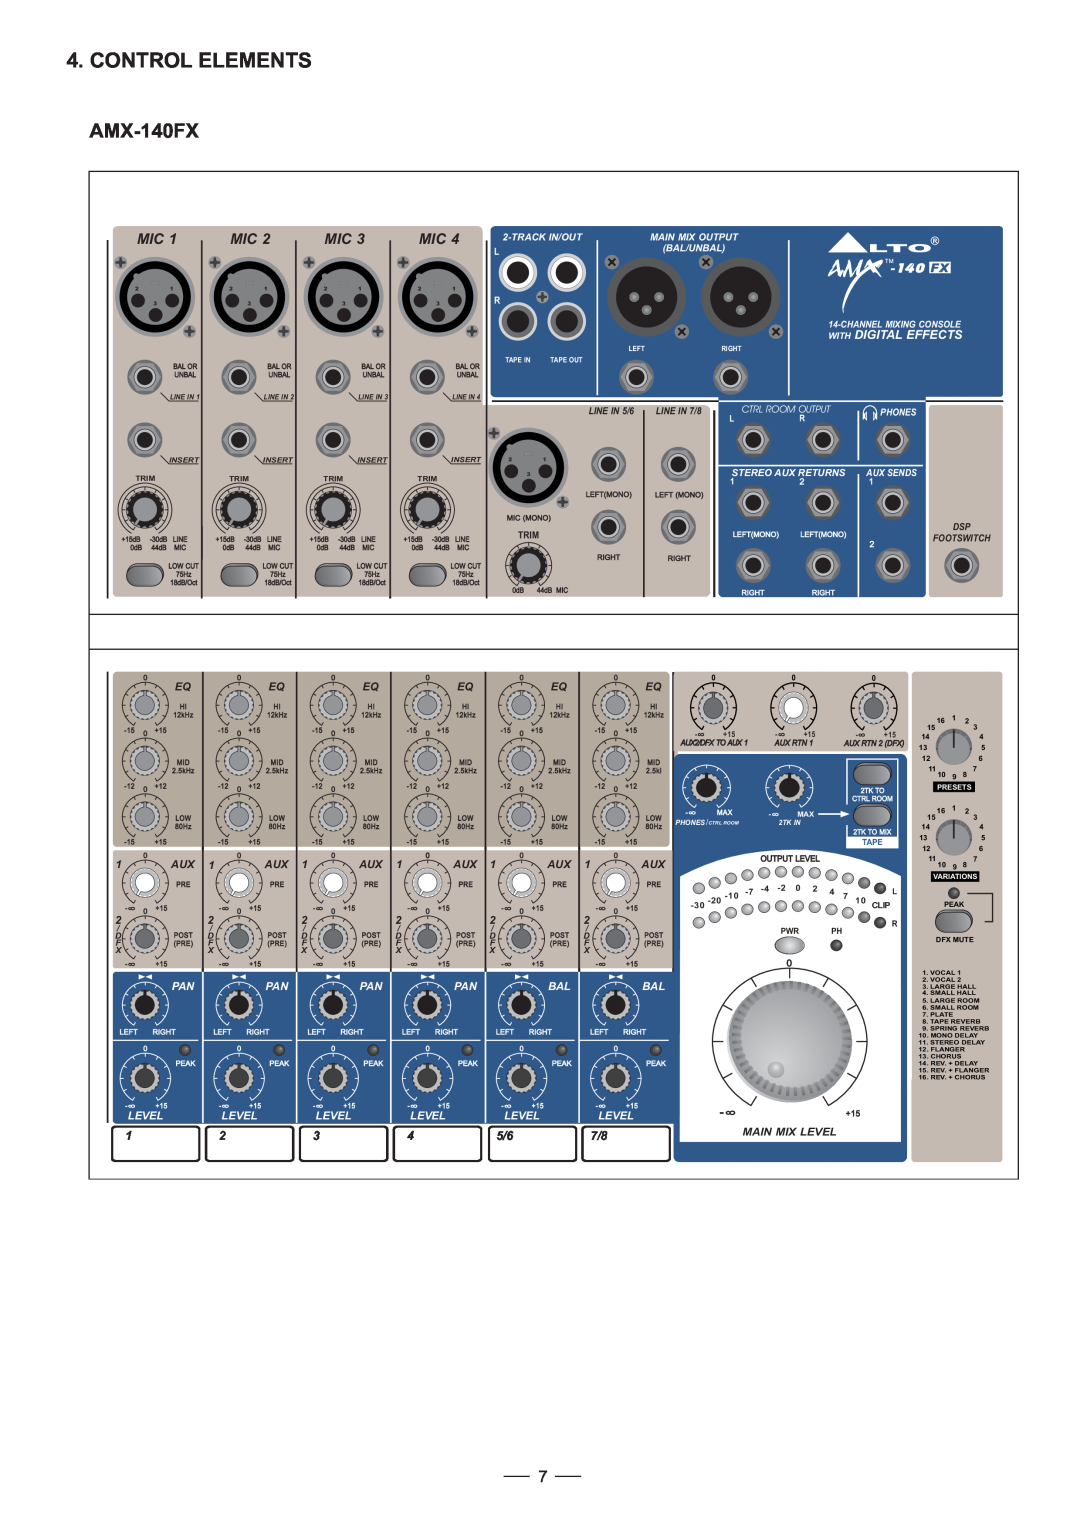 Nilfisk-ALTO user manual Control Elements, AMX-140FX, 140 FX, With Digital Effects, Main Mix Level 